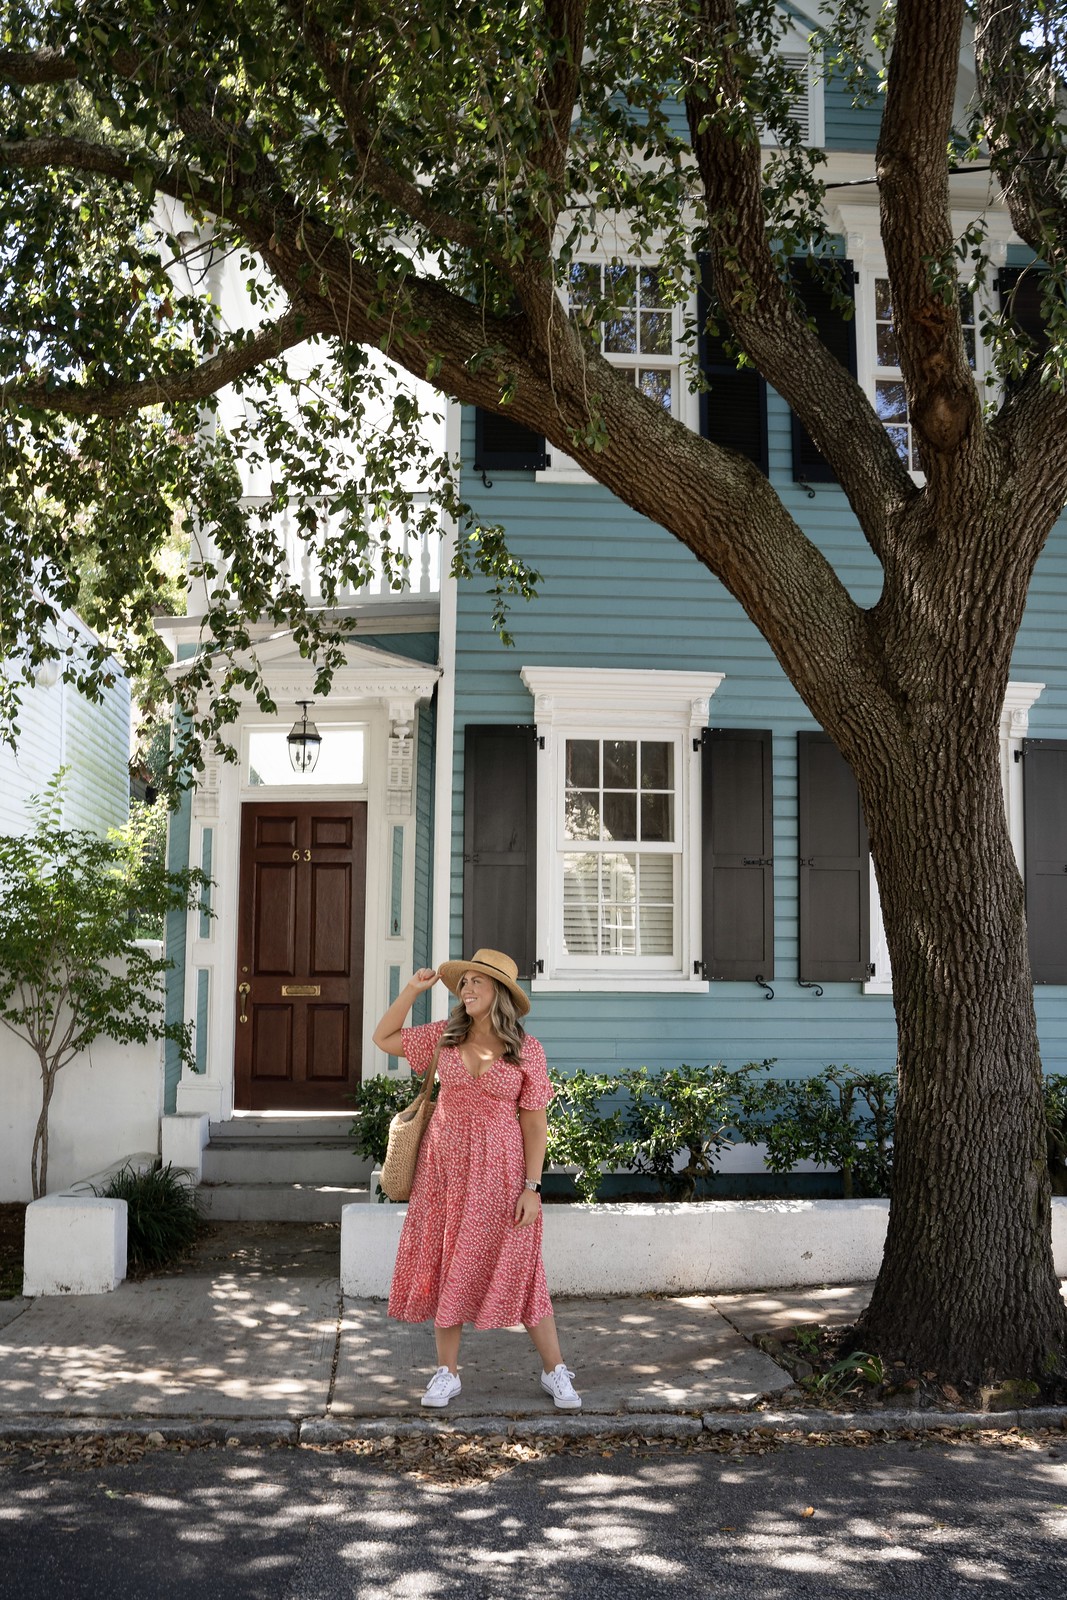 10 Things You Must Do in Charleston | Colorful Houses South of Broad | What to Do in Charleston South Carolina | Charleston Travel Guide | Top Things to do in Charleston | Best Things to Do in Charleston SC | What to See, Do & Eat in Charleston